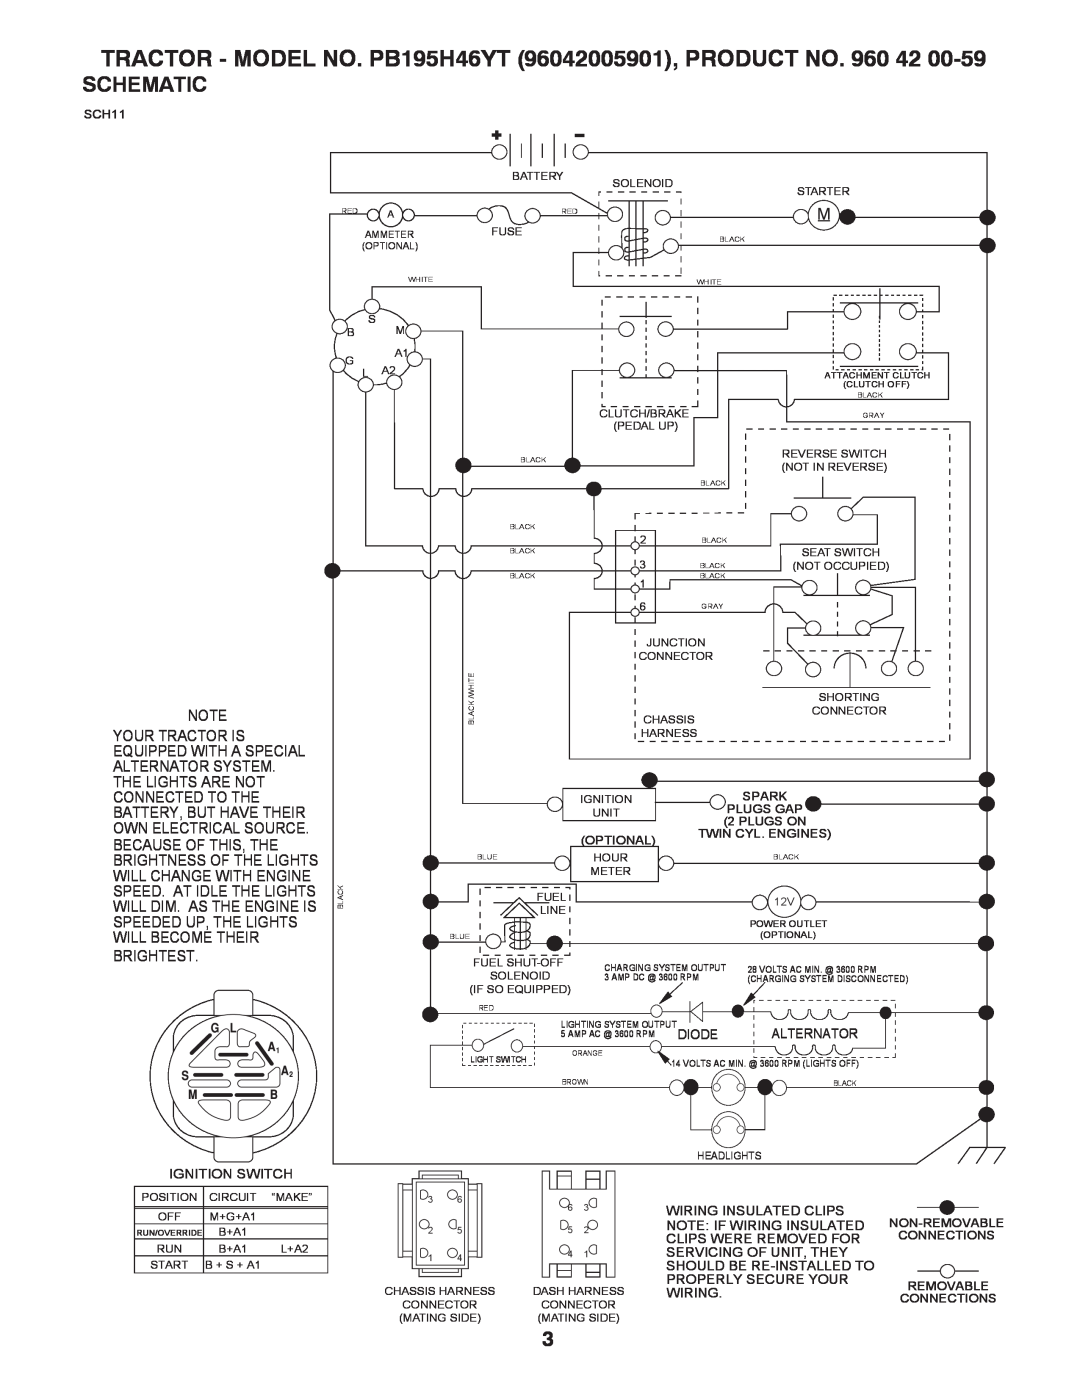 Poulan manual Schematic, TRACTOR - MODEL NO. PB195H46YT 96042005901, PRODUCT NO, Diode, Ignition Switch, SCH11, Spark 